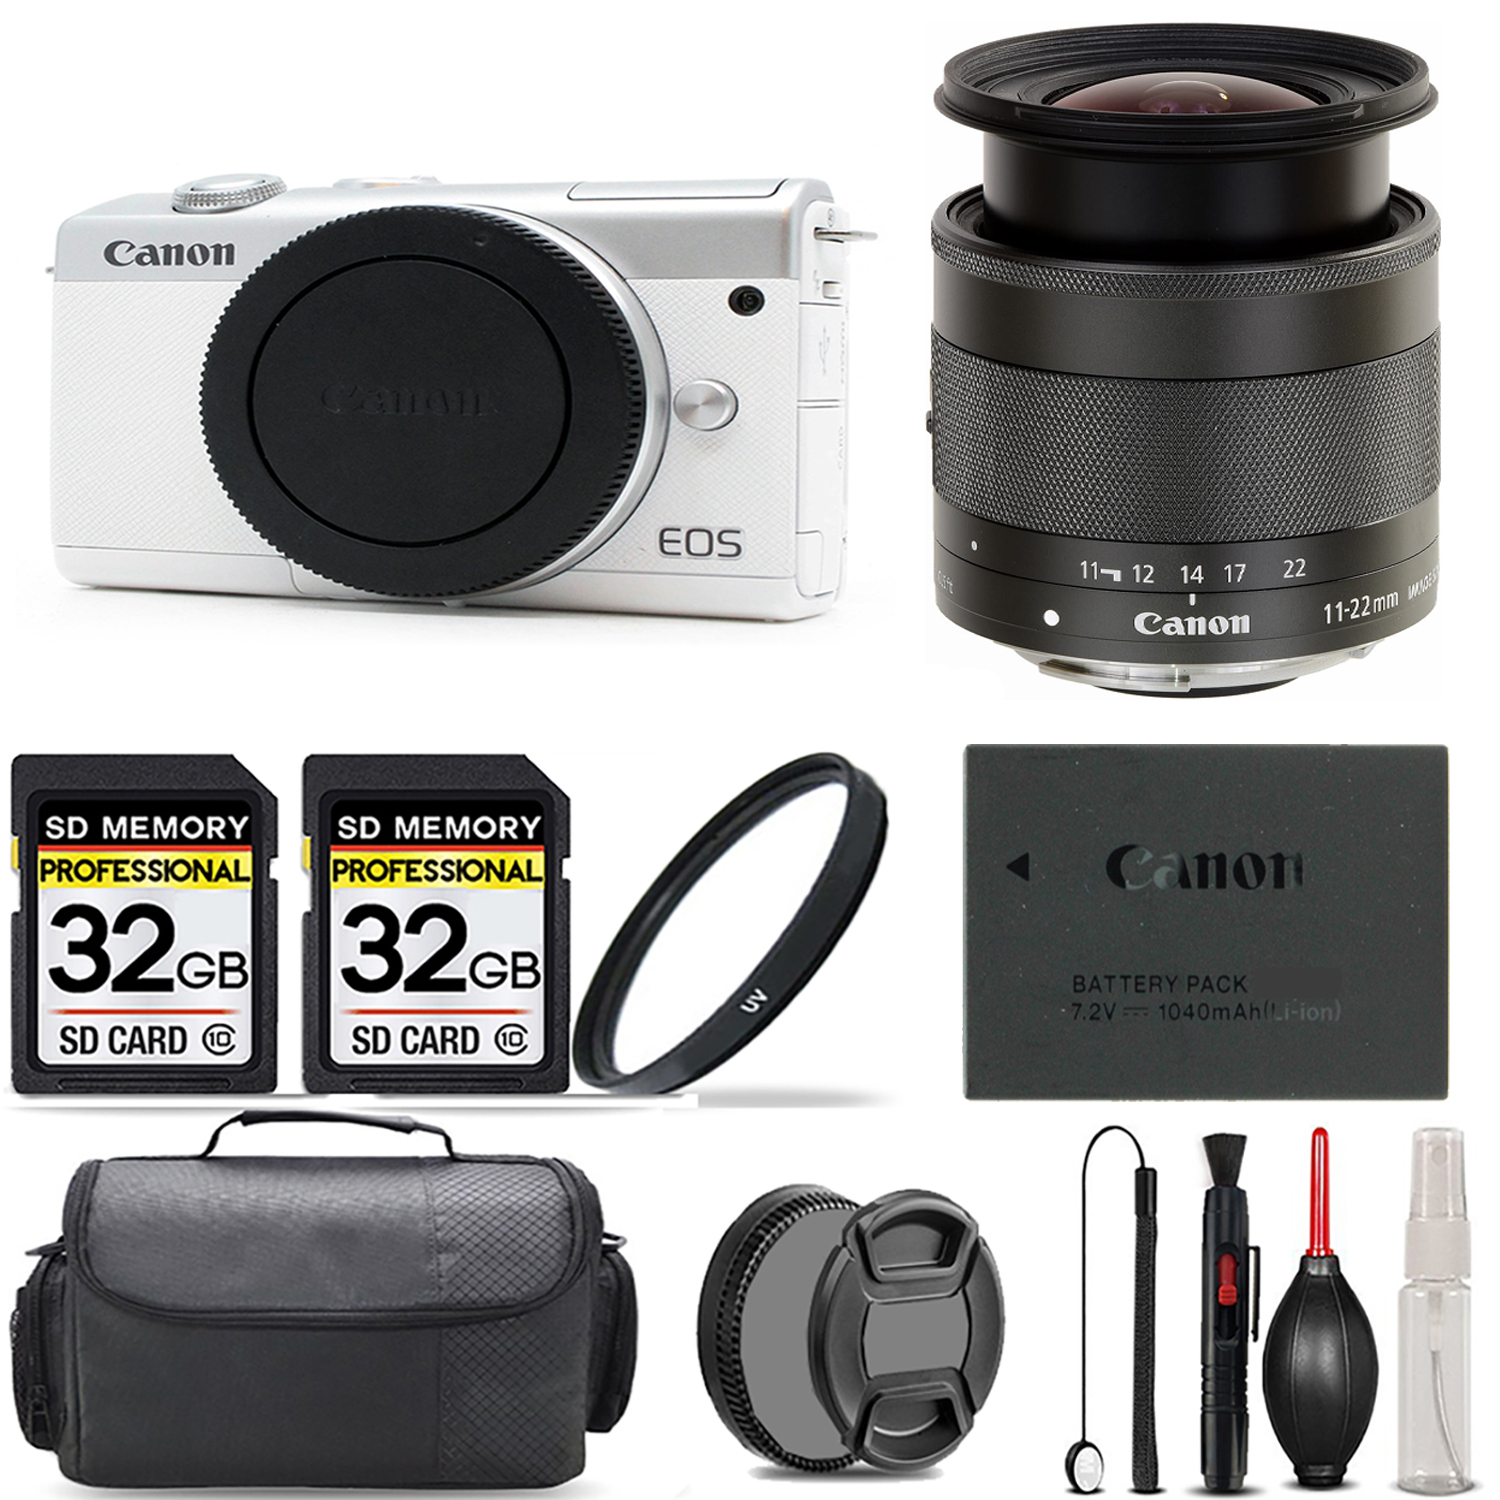 EOS M200  Camera (White) + 11-22mm f/4-5.6 IS STM Lens + UV Filter + 64GB *FREE SHIPPING*